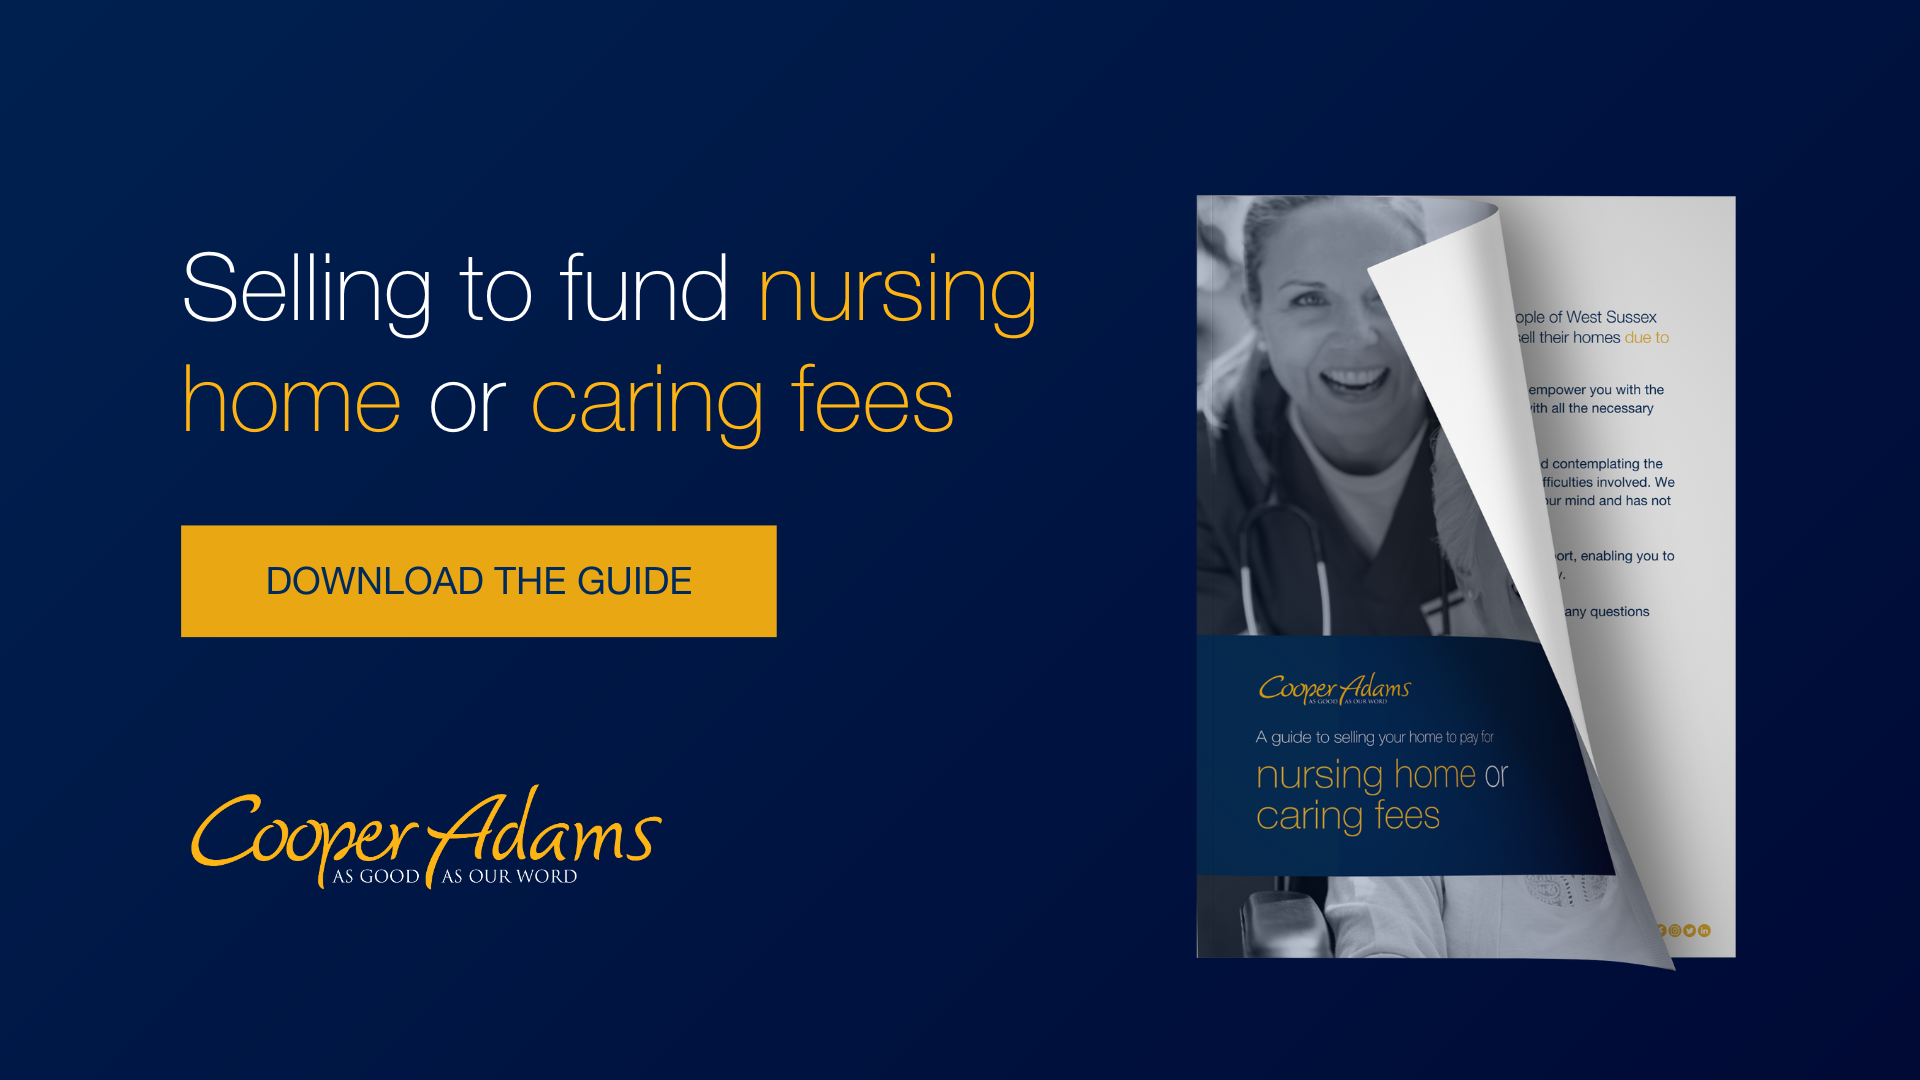 Download our guide to selling a property to pay for nursing home or care fees